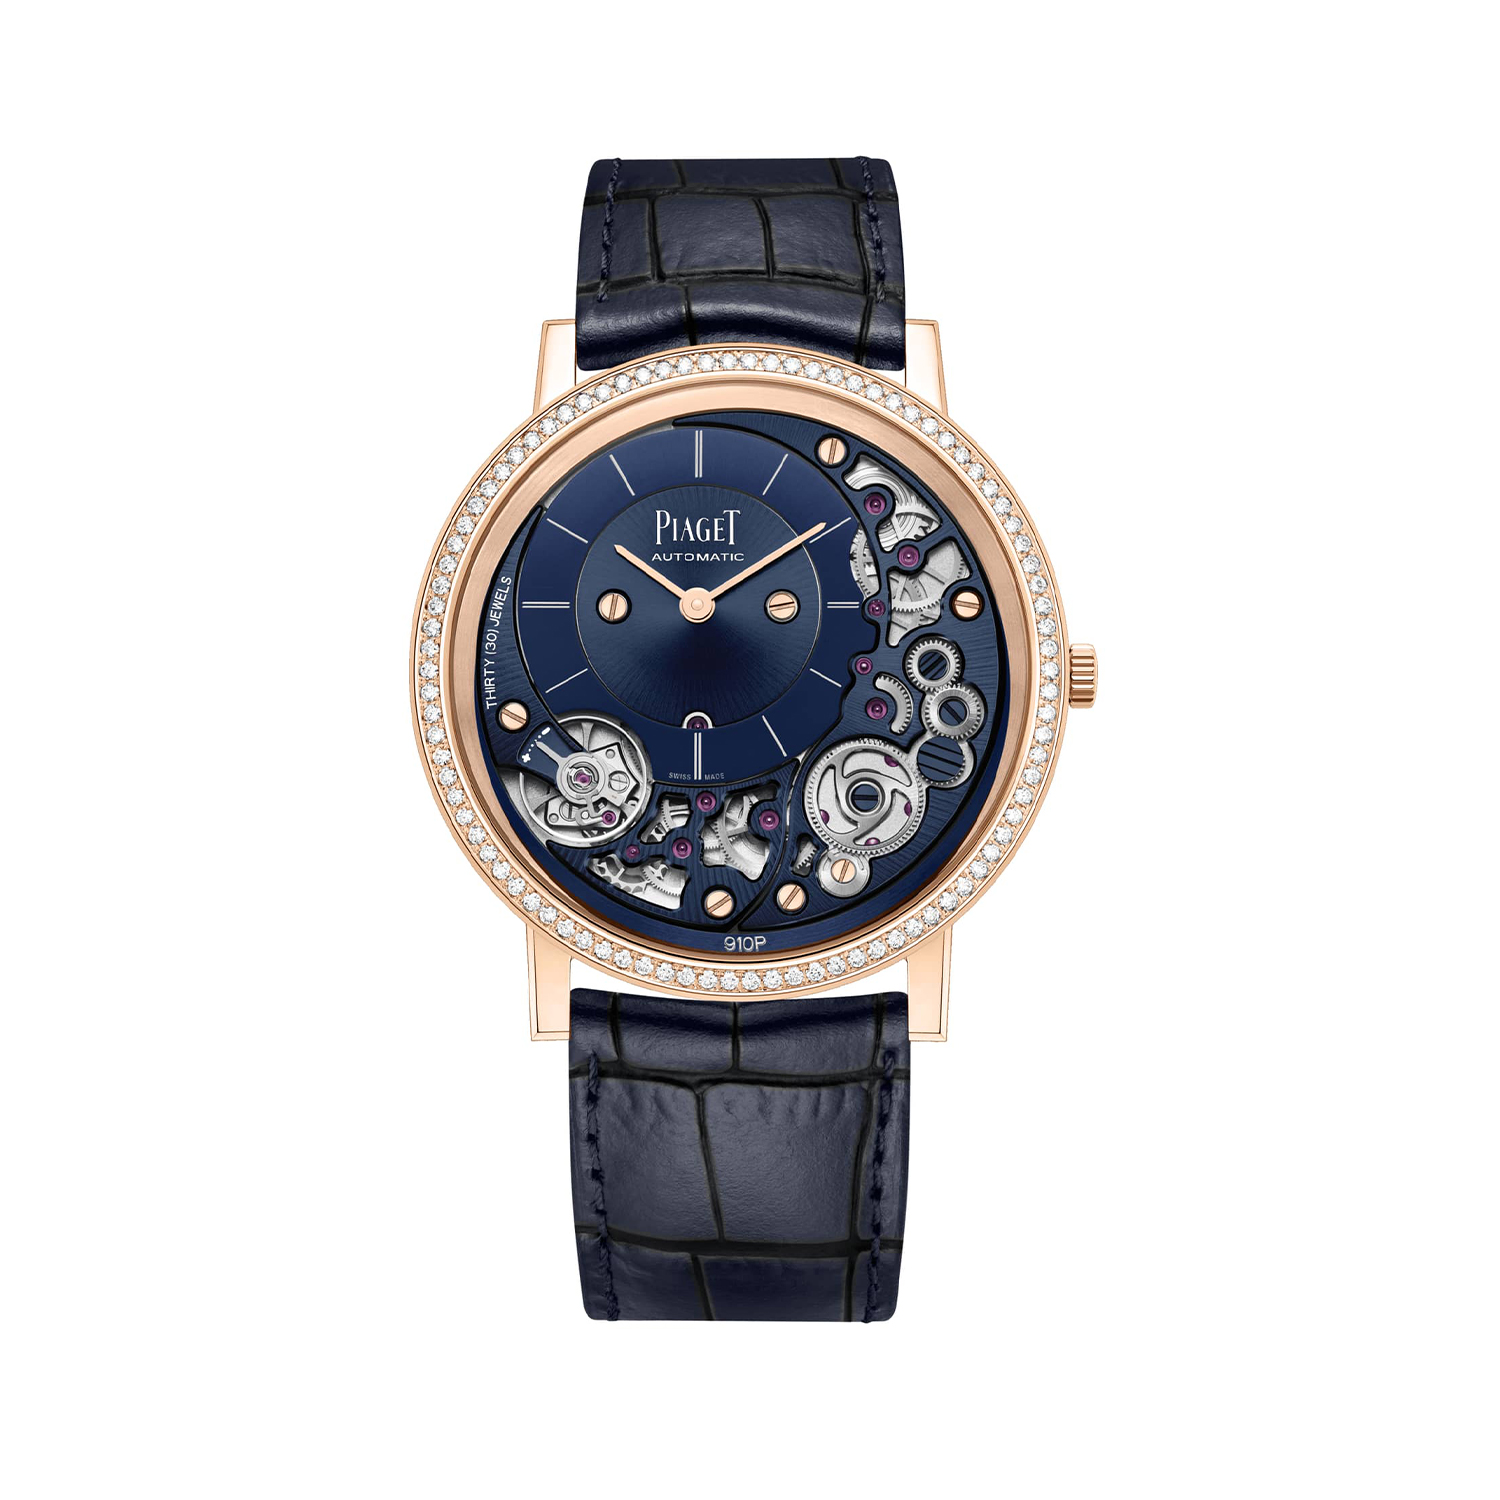 Montre altiplano ultimate automatic - Piaget